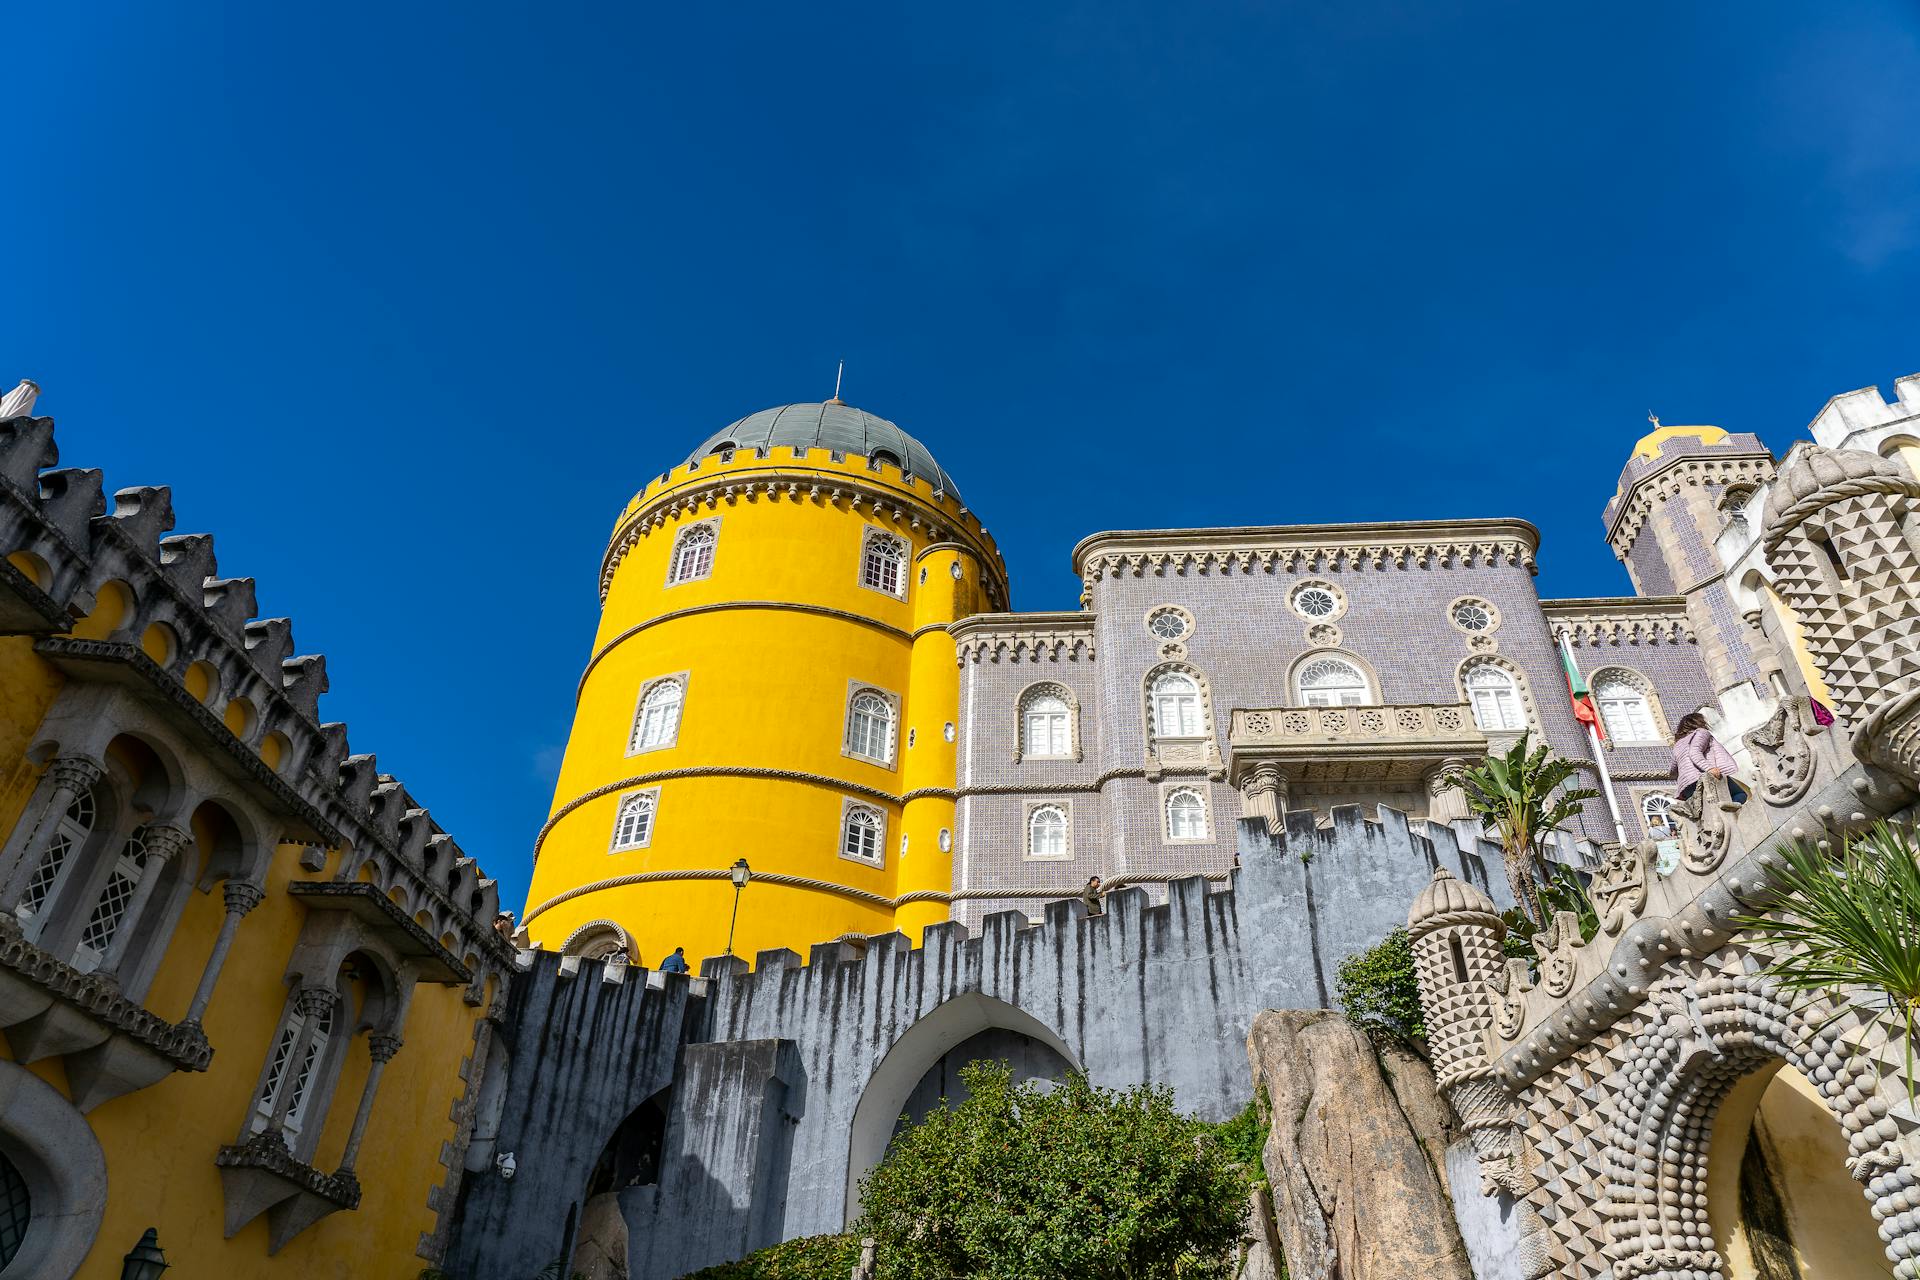 <p>Pena National Palace was once the summer home of King Ferdinand II. </p>  <p>The design of the castle was show influences of<strong> European and Middle Eastern Baroque architecture</strong>, and is a grand example of Portuguese Romanticism.</p>